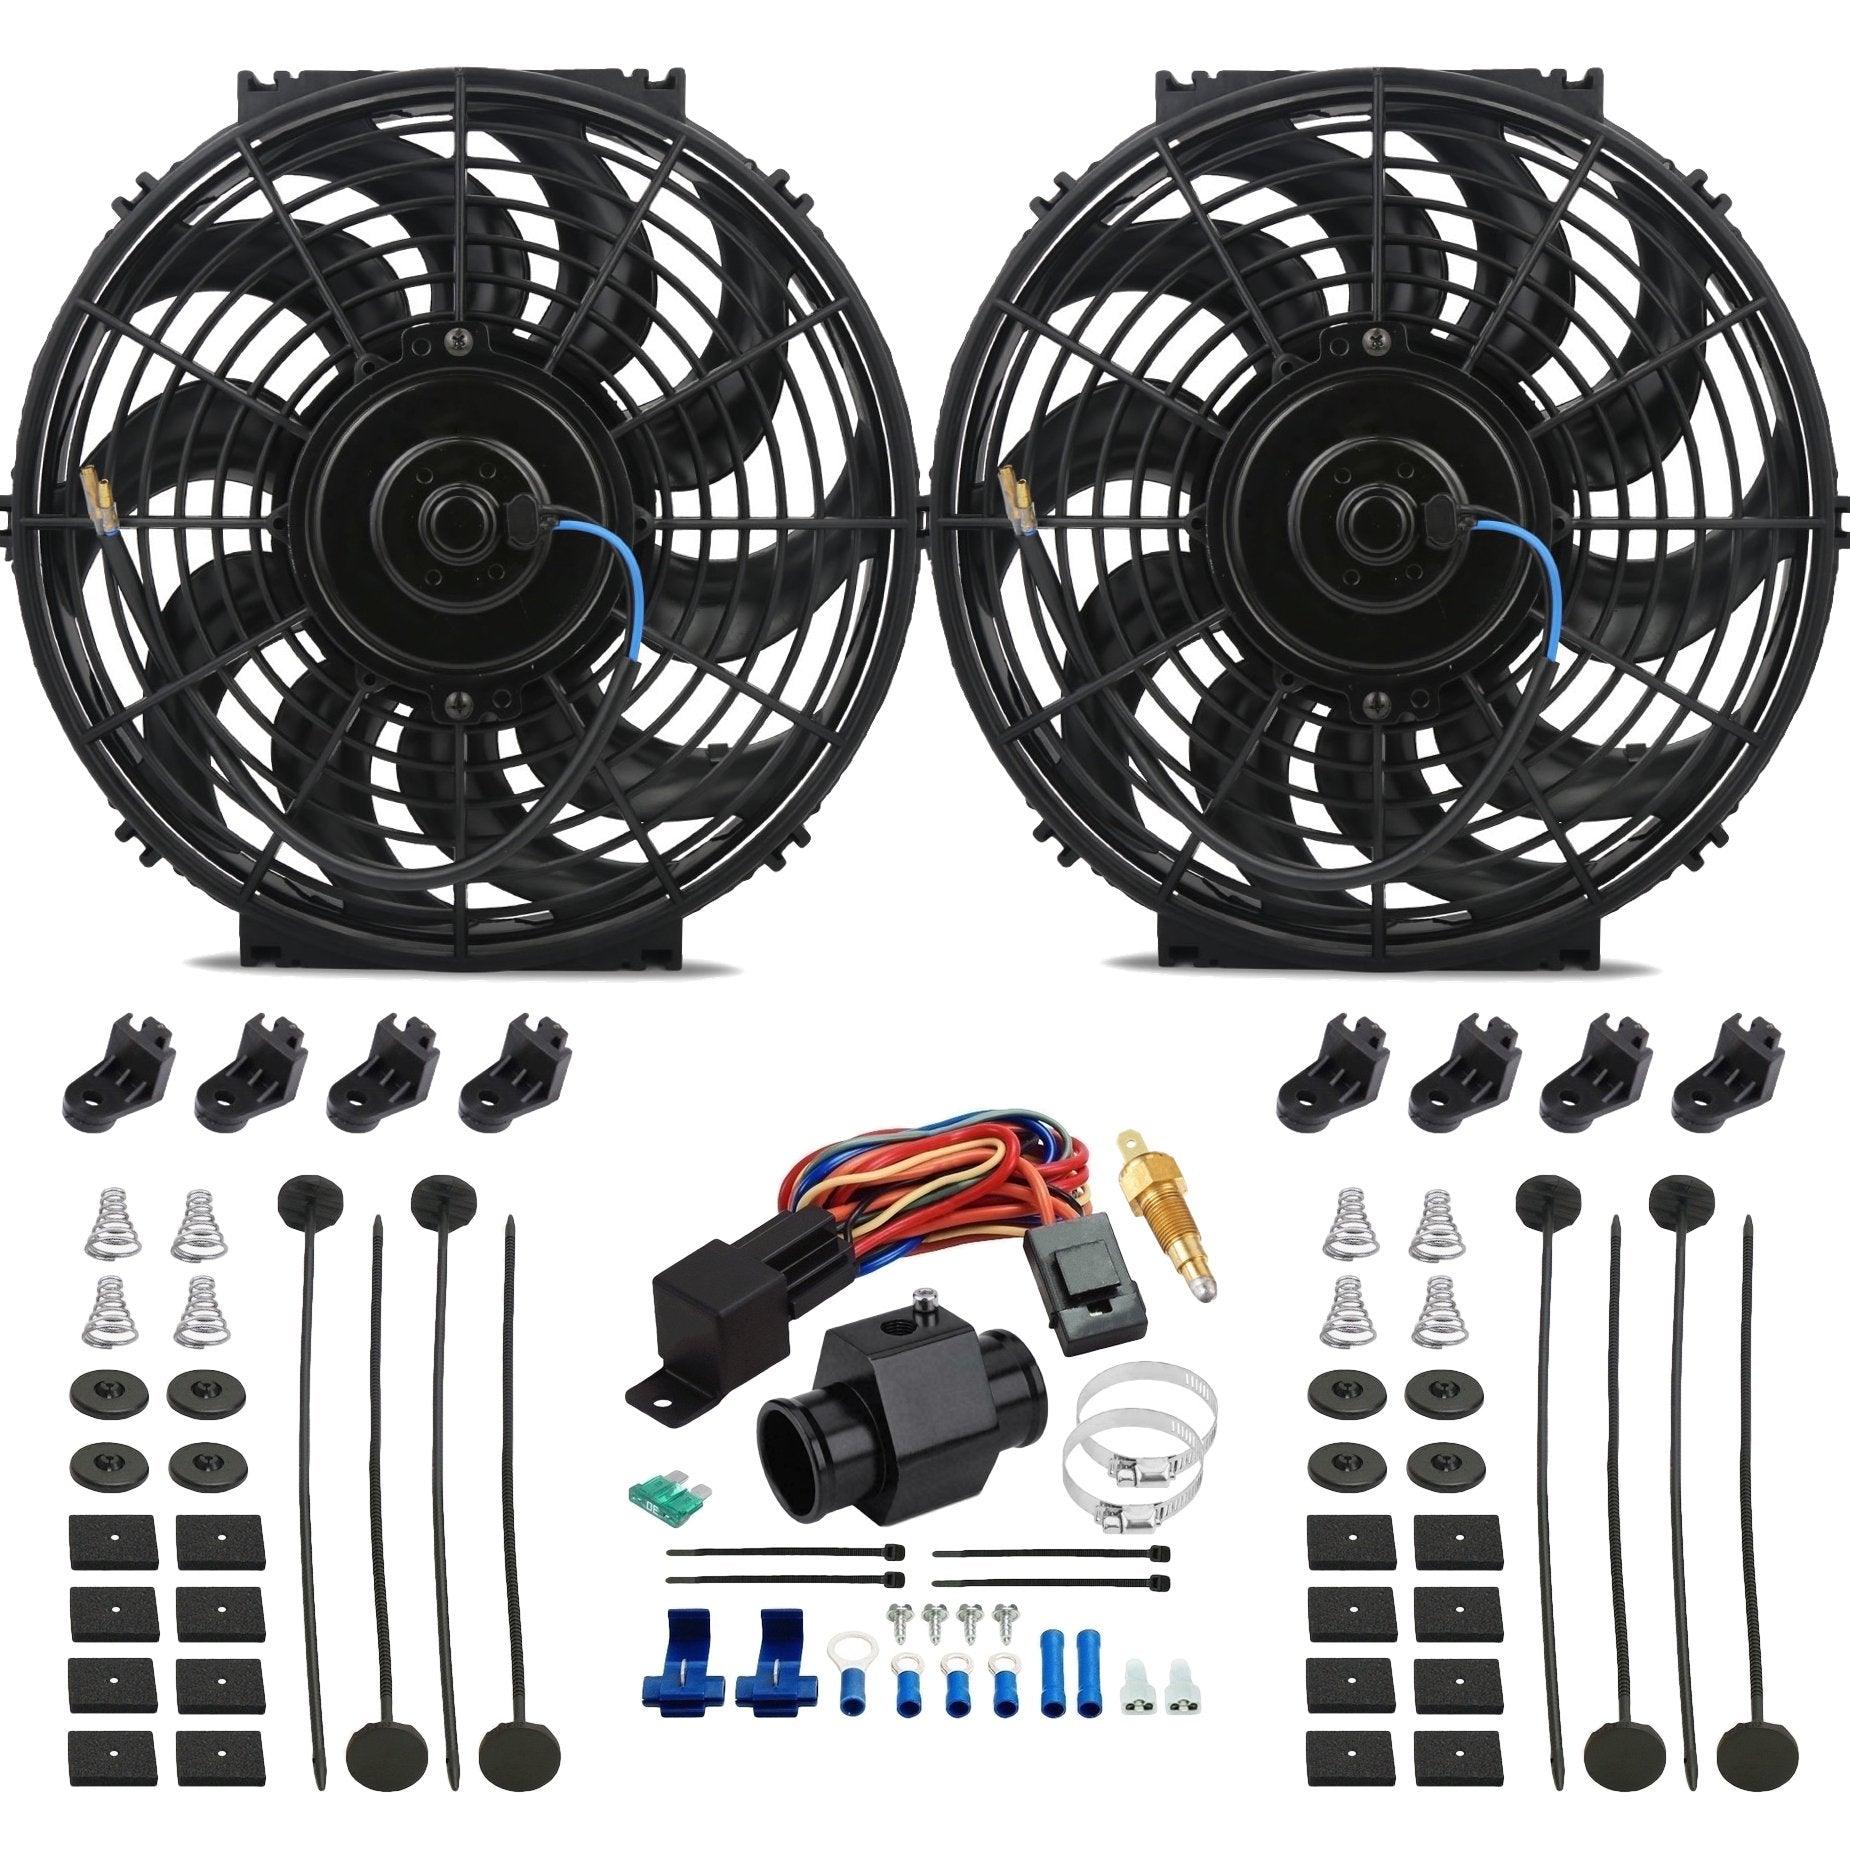 Dual 12-13 Inch 90w Electric Fans Radiator In-Hose Grounding Temp Swit –  American Volt